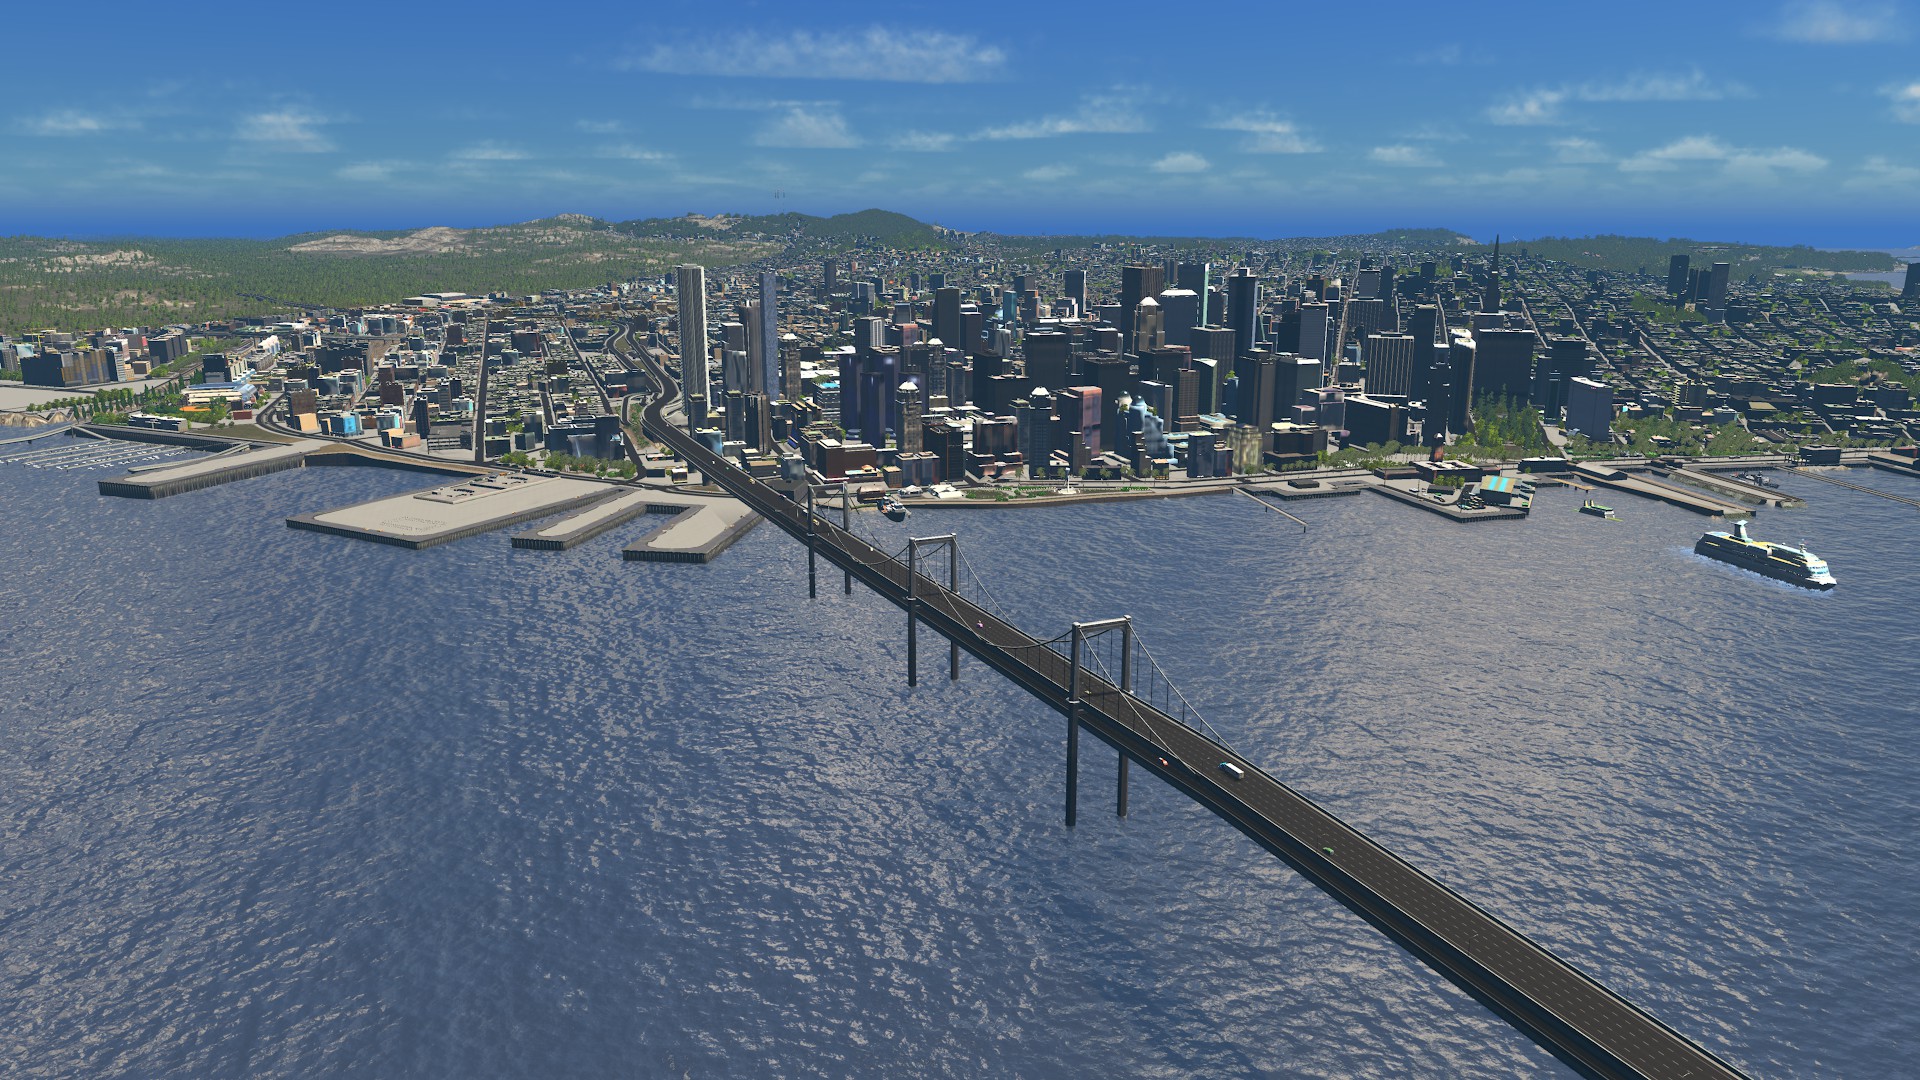 Cities Skylines Player Spends Hundreds Of Hours Building A Near-Perfect San Francisco